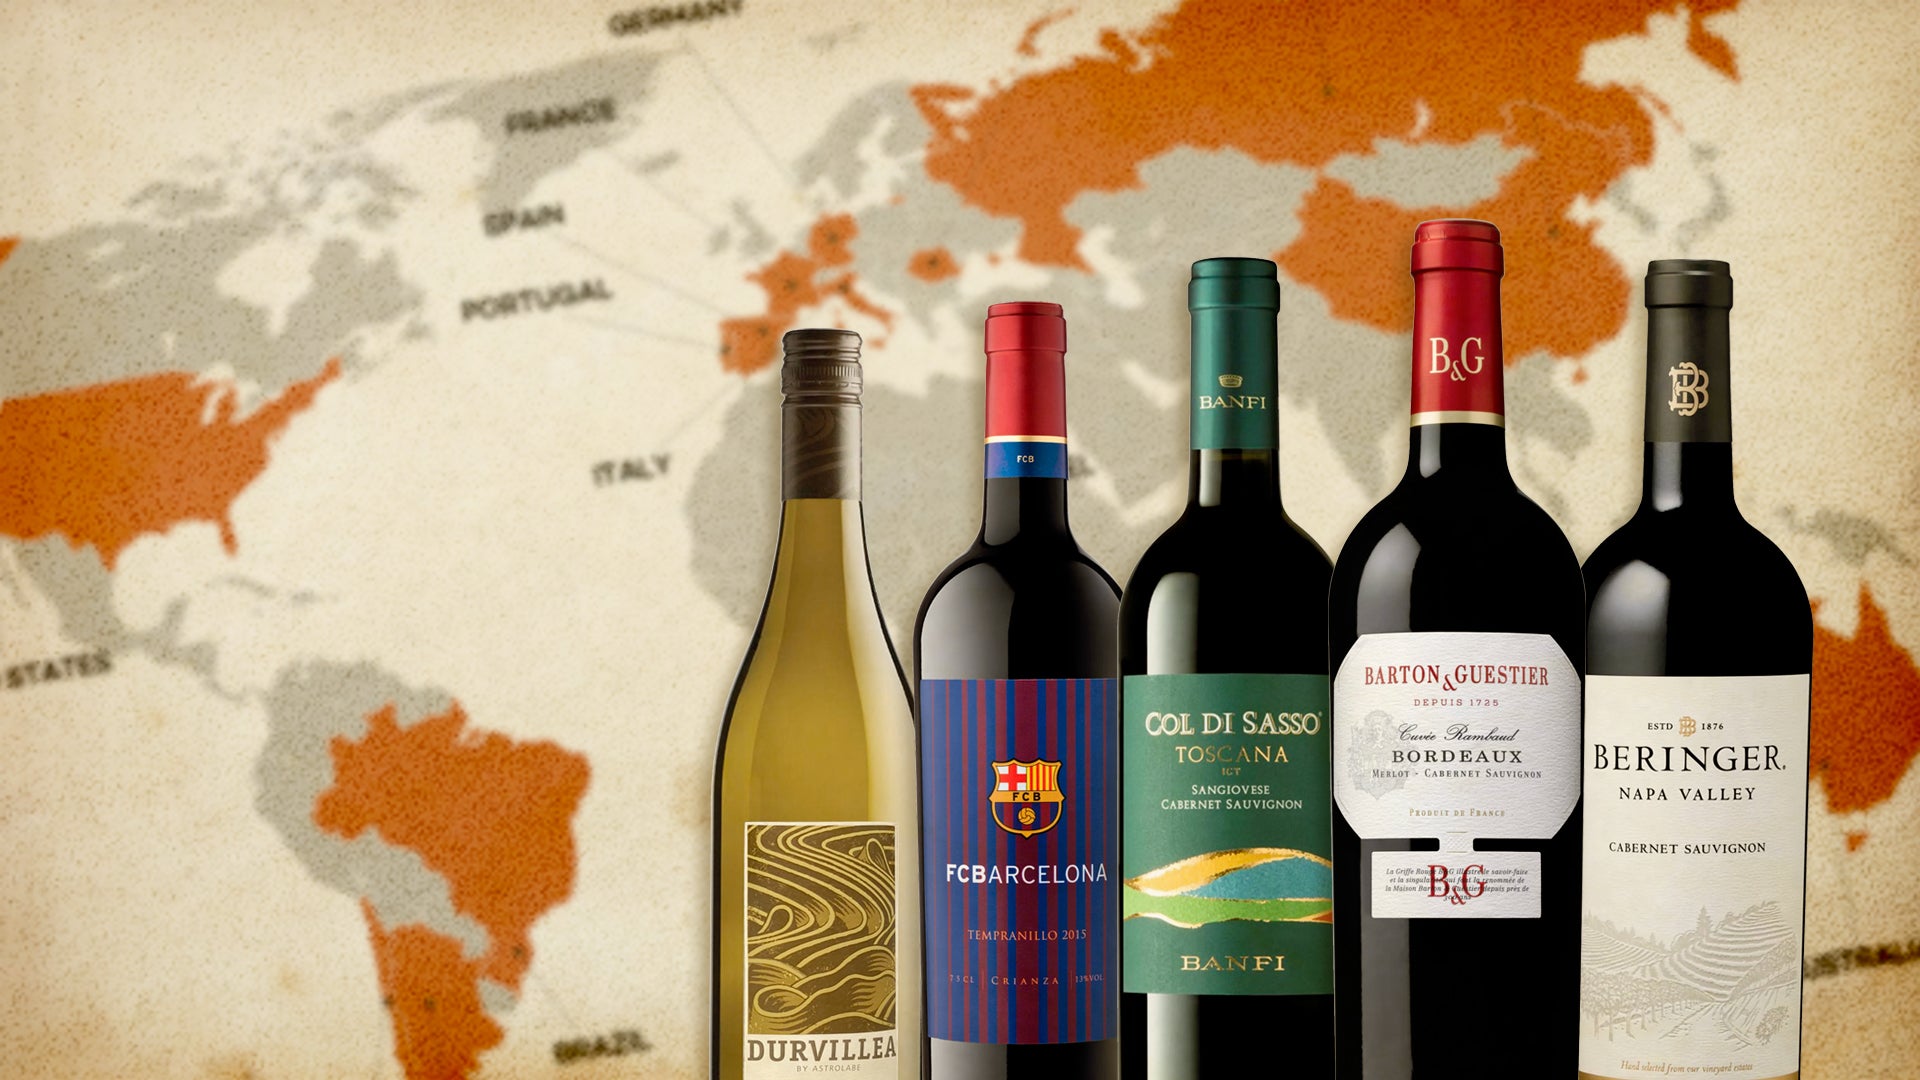 6 Characteristics of Wines from Different Regions